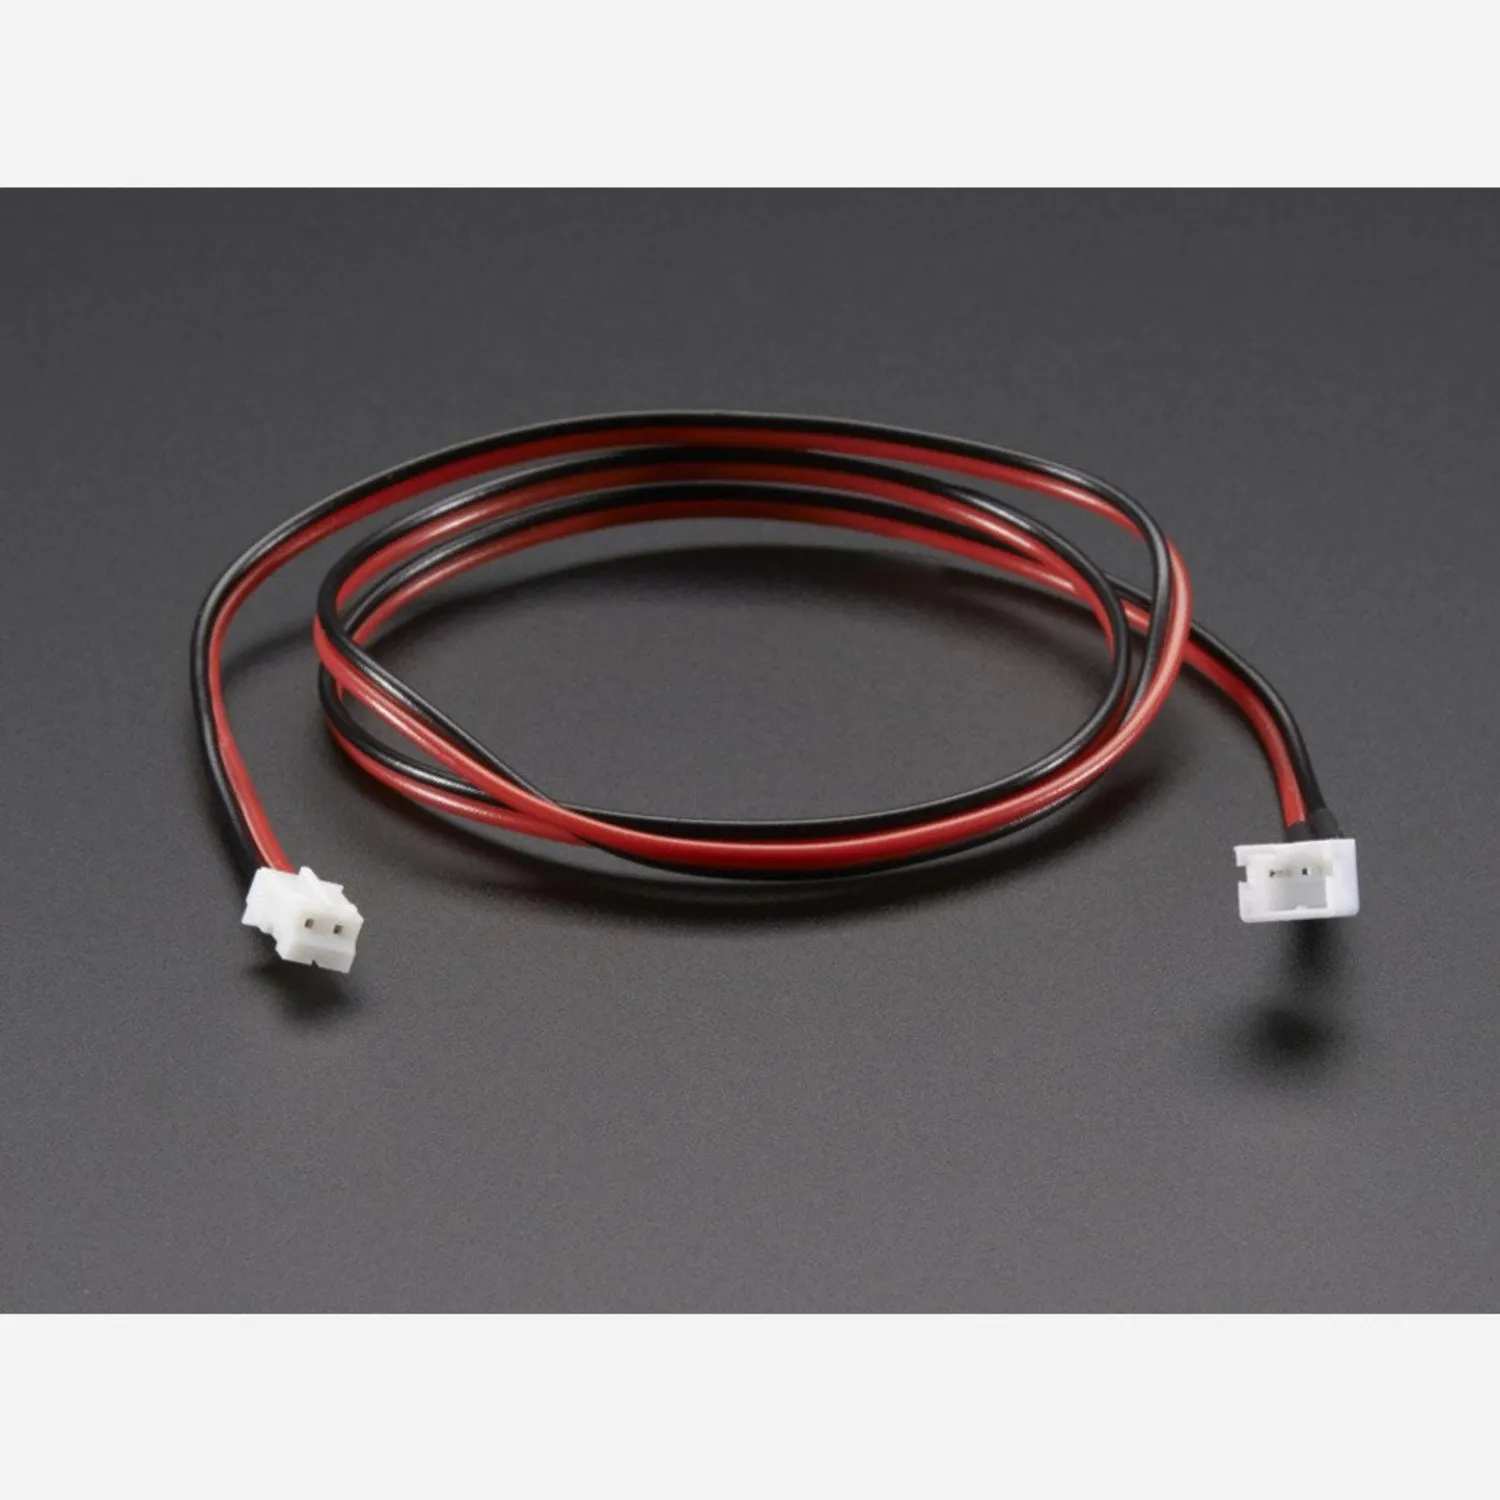 Photo of JST-PH Battery Extension Cable - 500mm